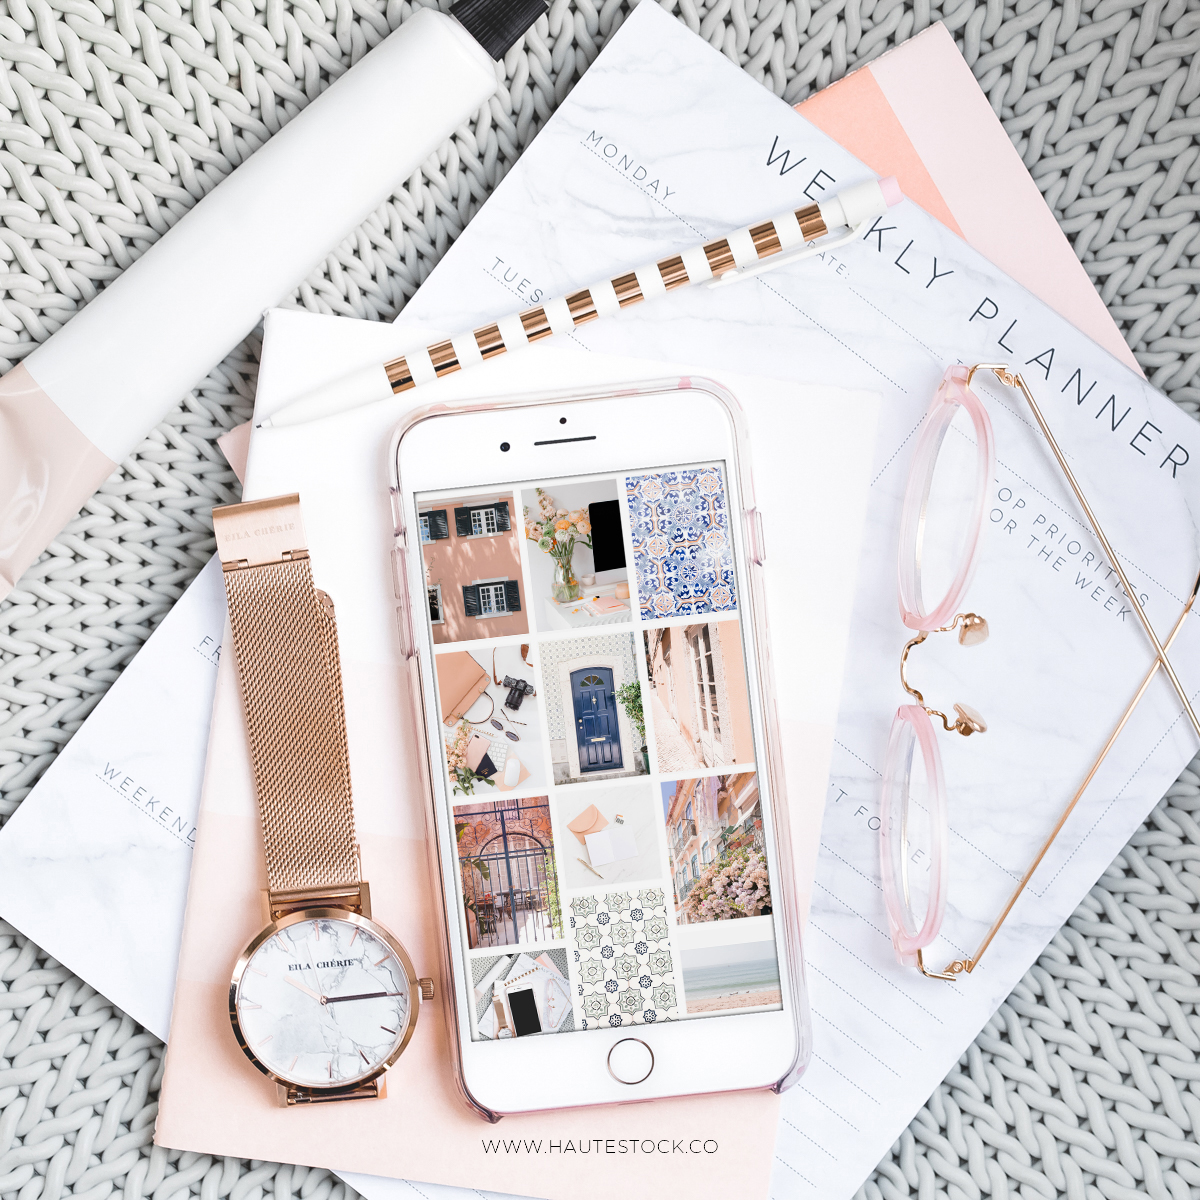 Travel, lifestyle and workspace stock photos exclusively from Haute Stock. Create gorgeous iPhone mockups  to display your work, website and social media accounts.